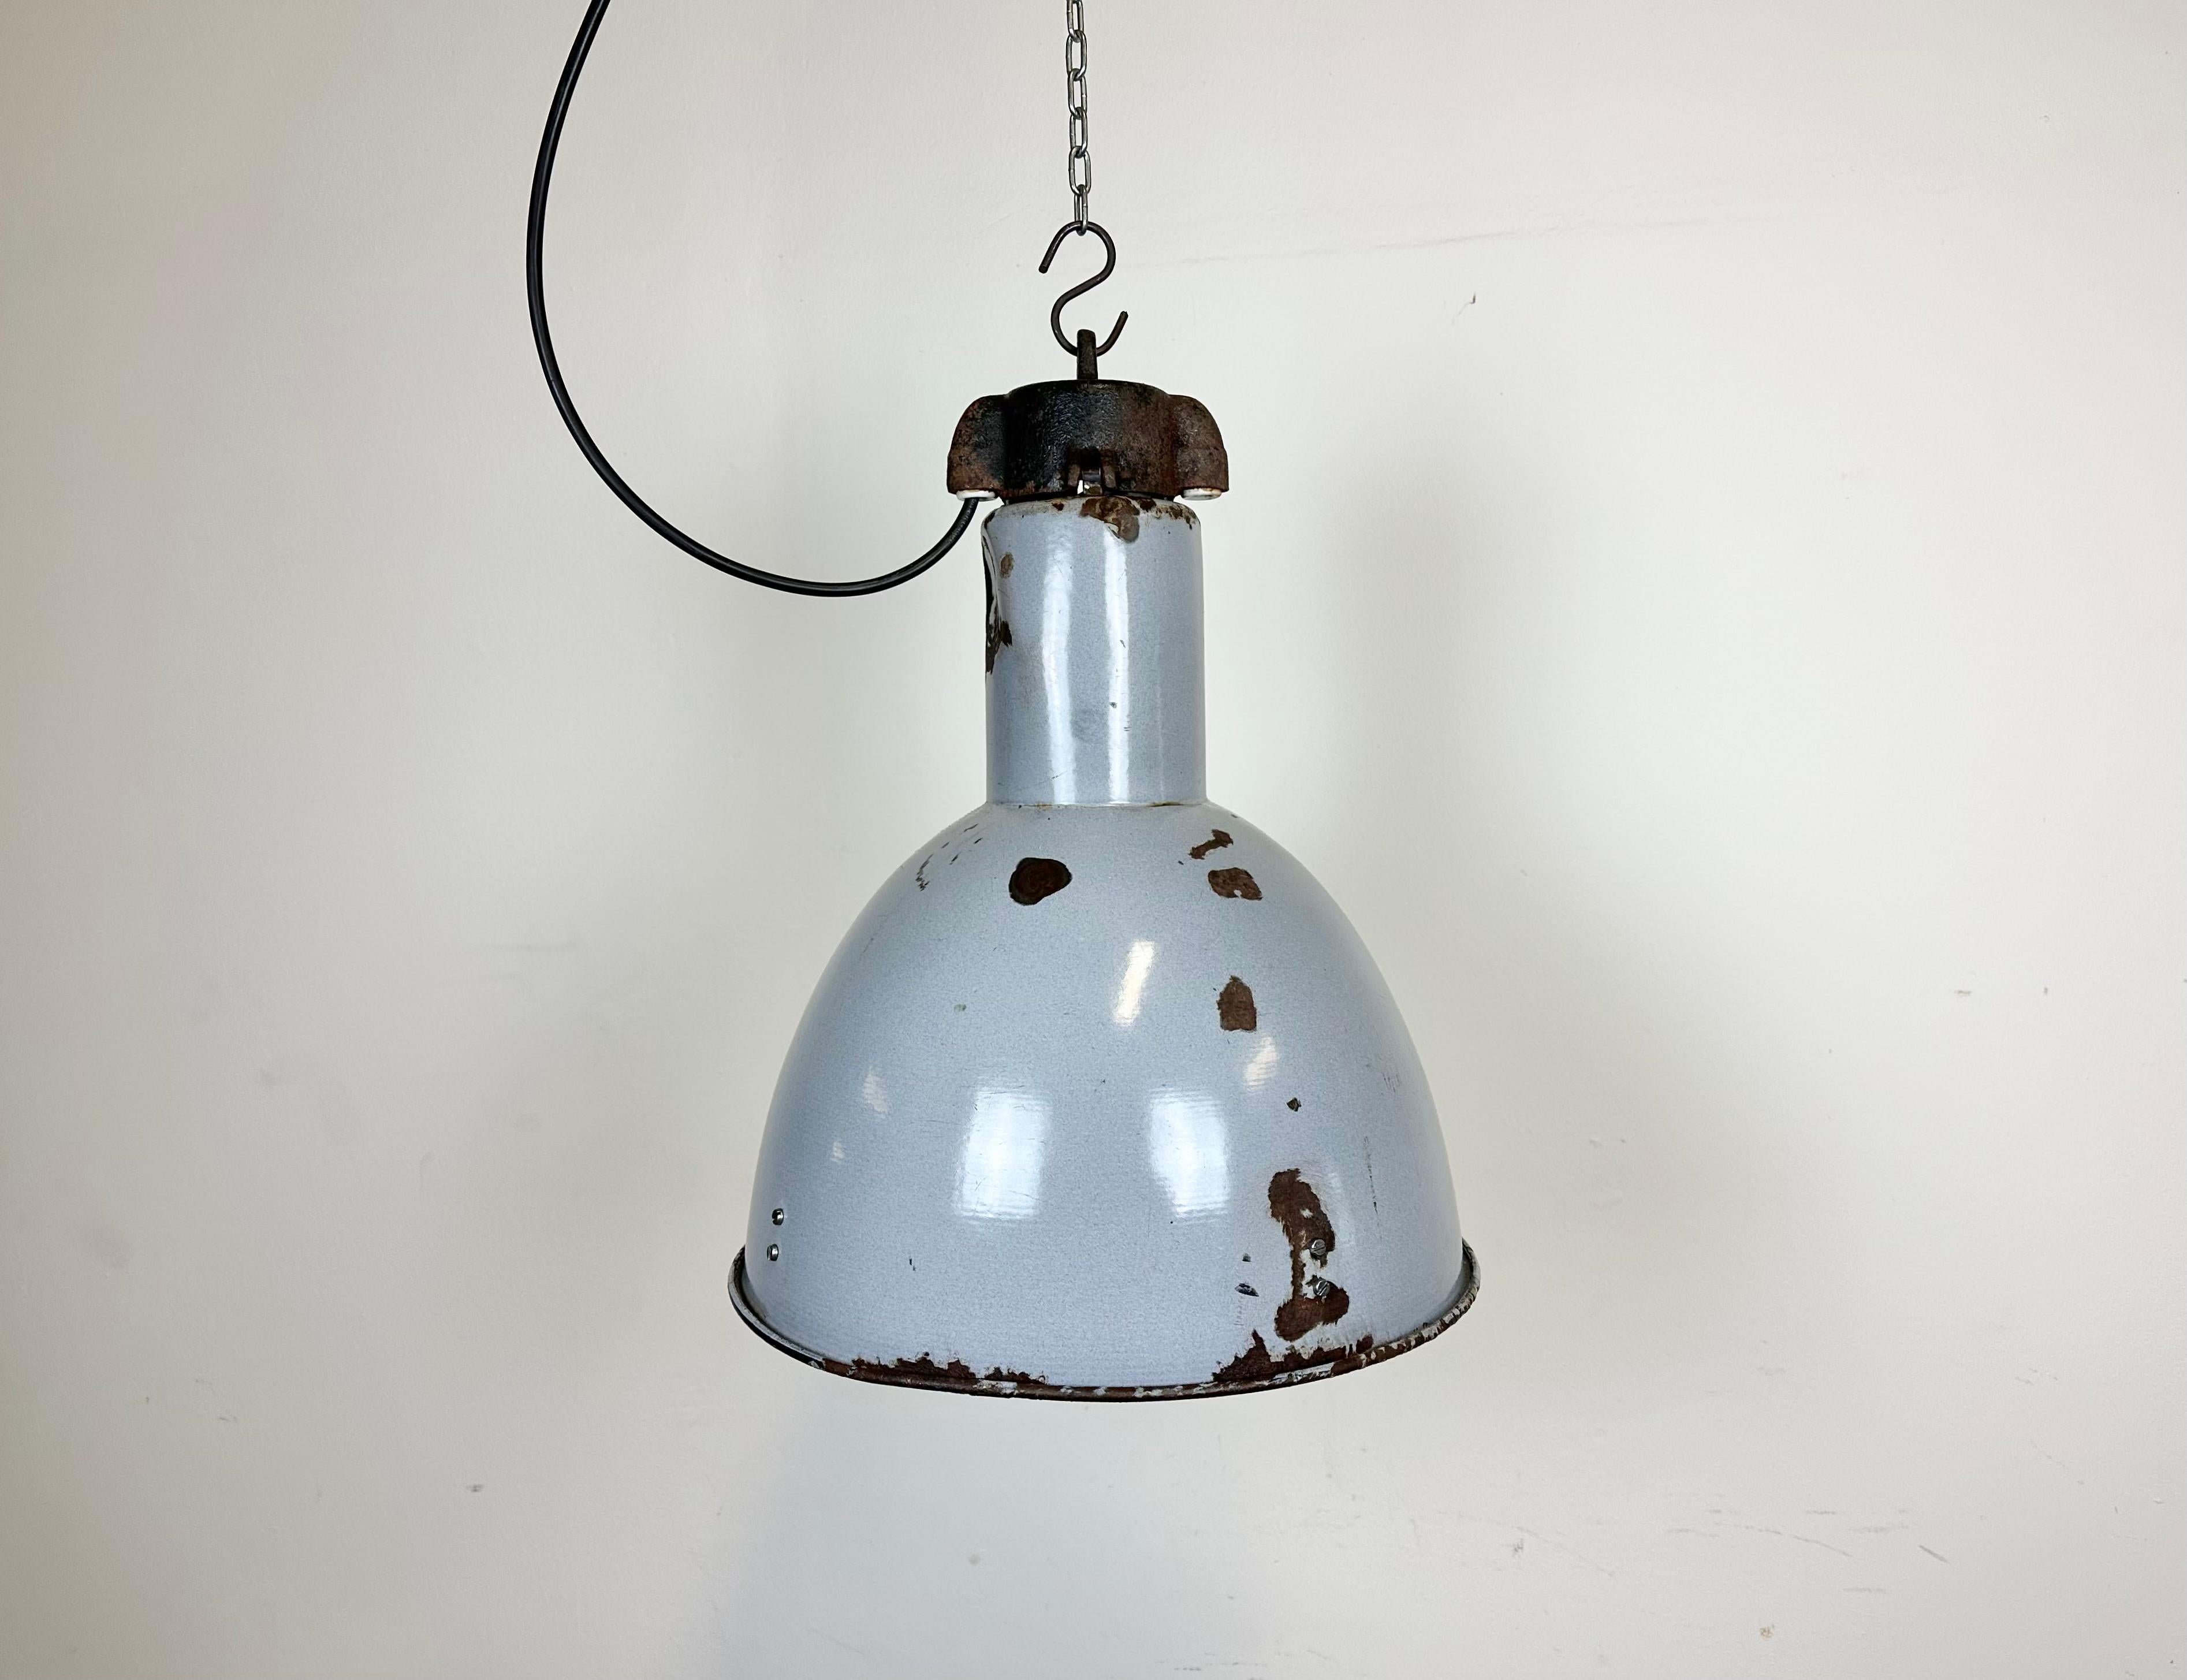 Vintage Industrial light in Bauhaus style made in former Czechoslovakia during the 1950s.It features a grey enamel body with white enamel interior and cast iron top. New porcelain socket requires E27/ E26 lightbulbs. New wire. The weight of the lamp